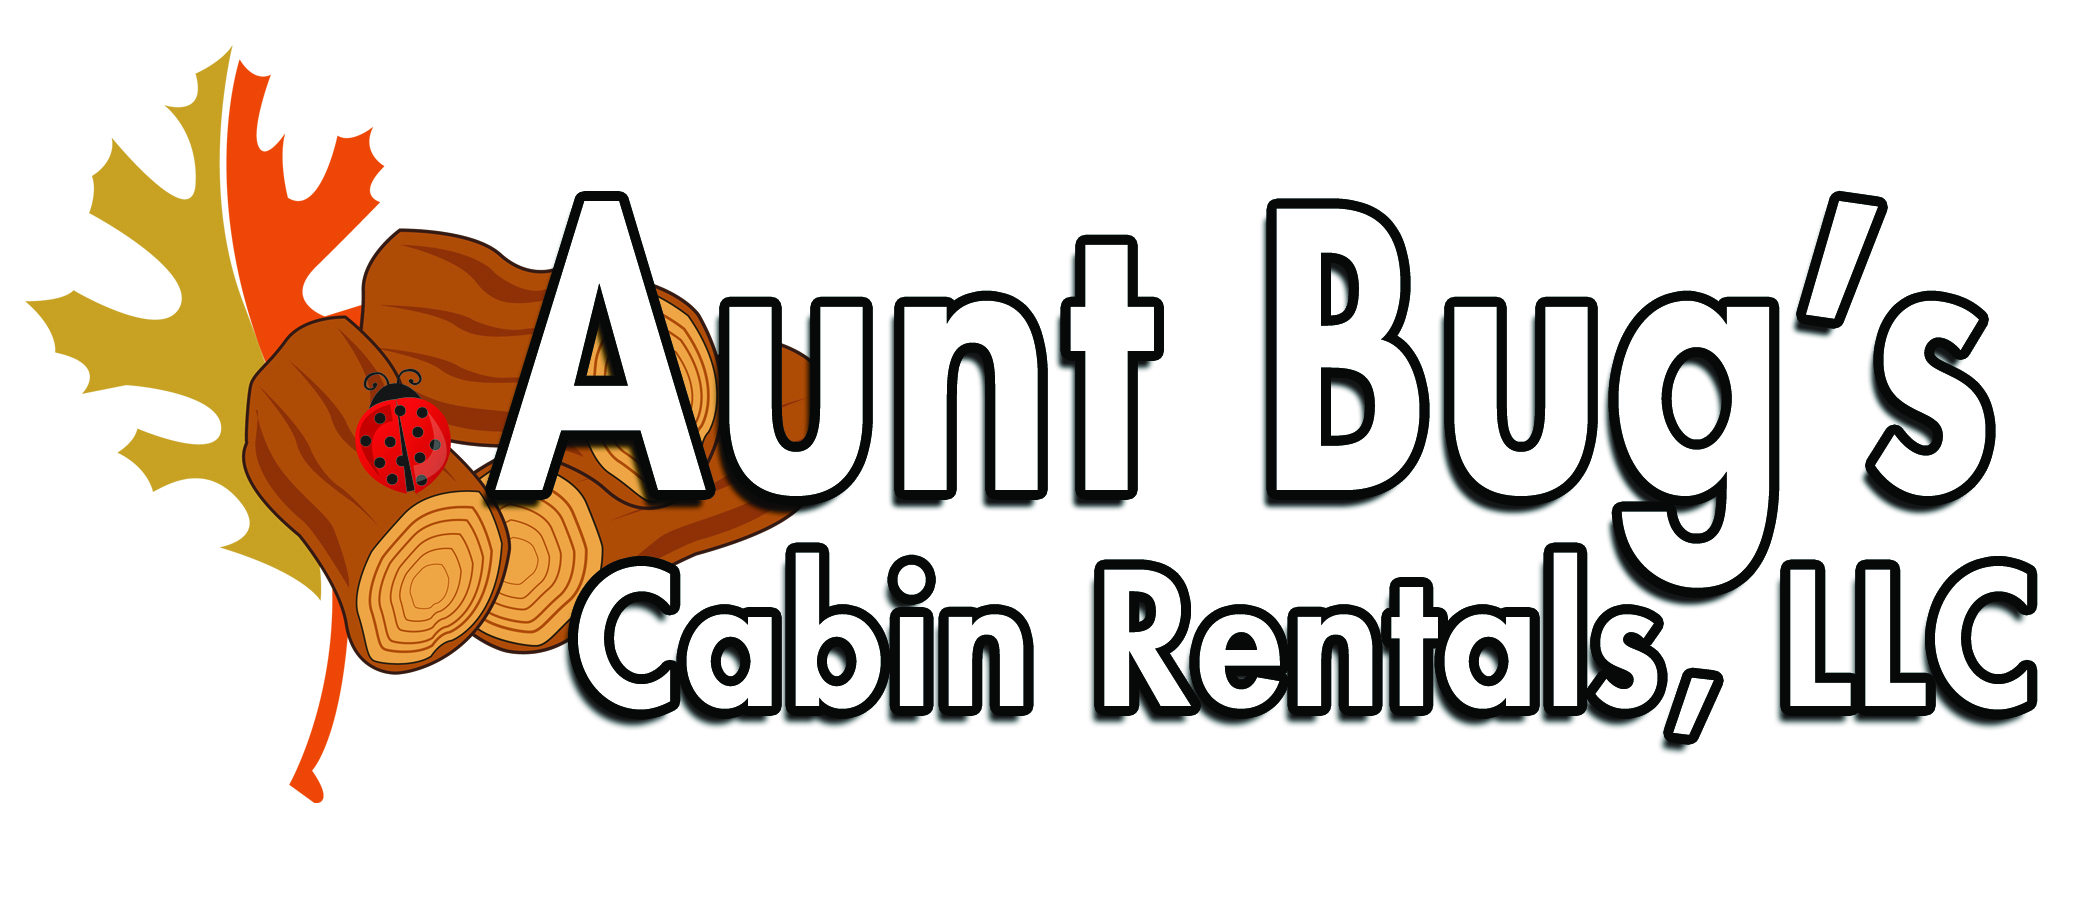 Aunt Bug's Cabin Rentals and Property Management in Gatlinburg, Pigeon Forge, & throughout The Smoky Mountains.